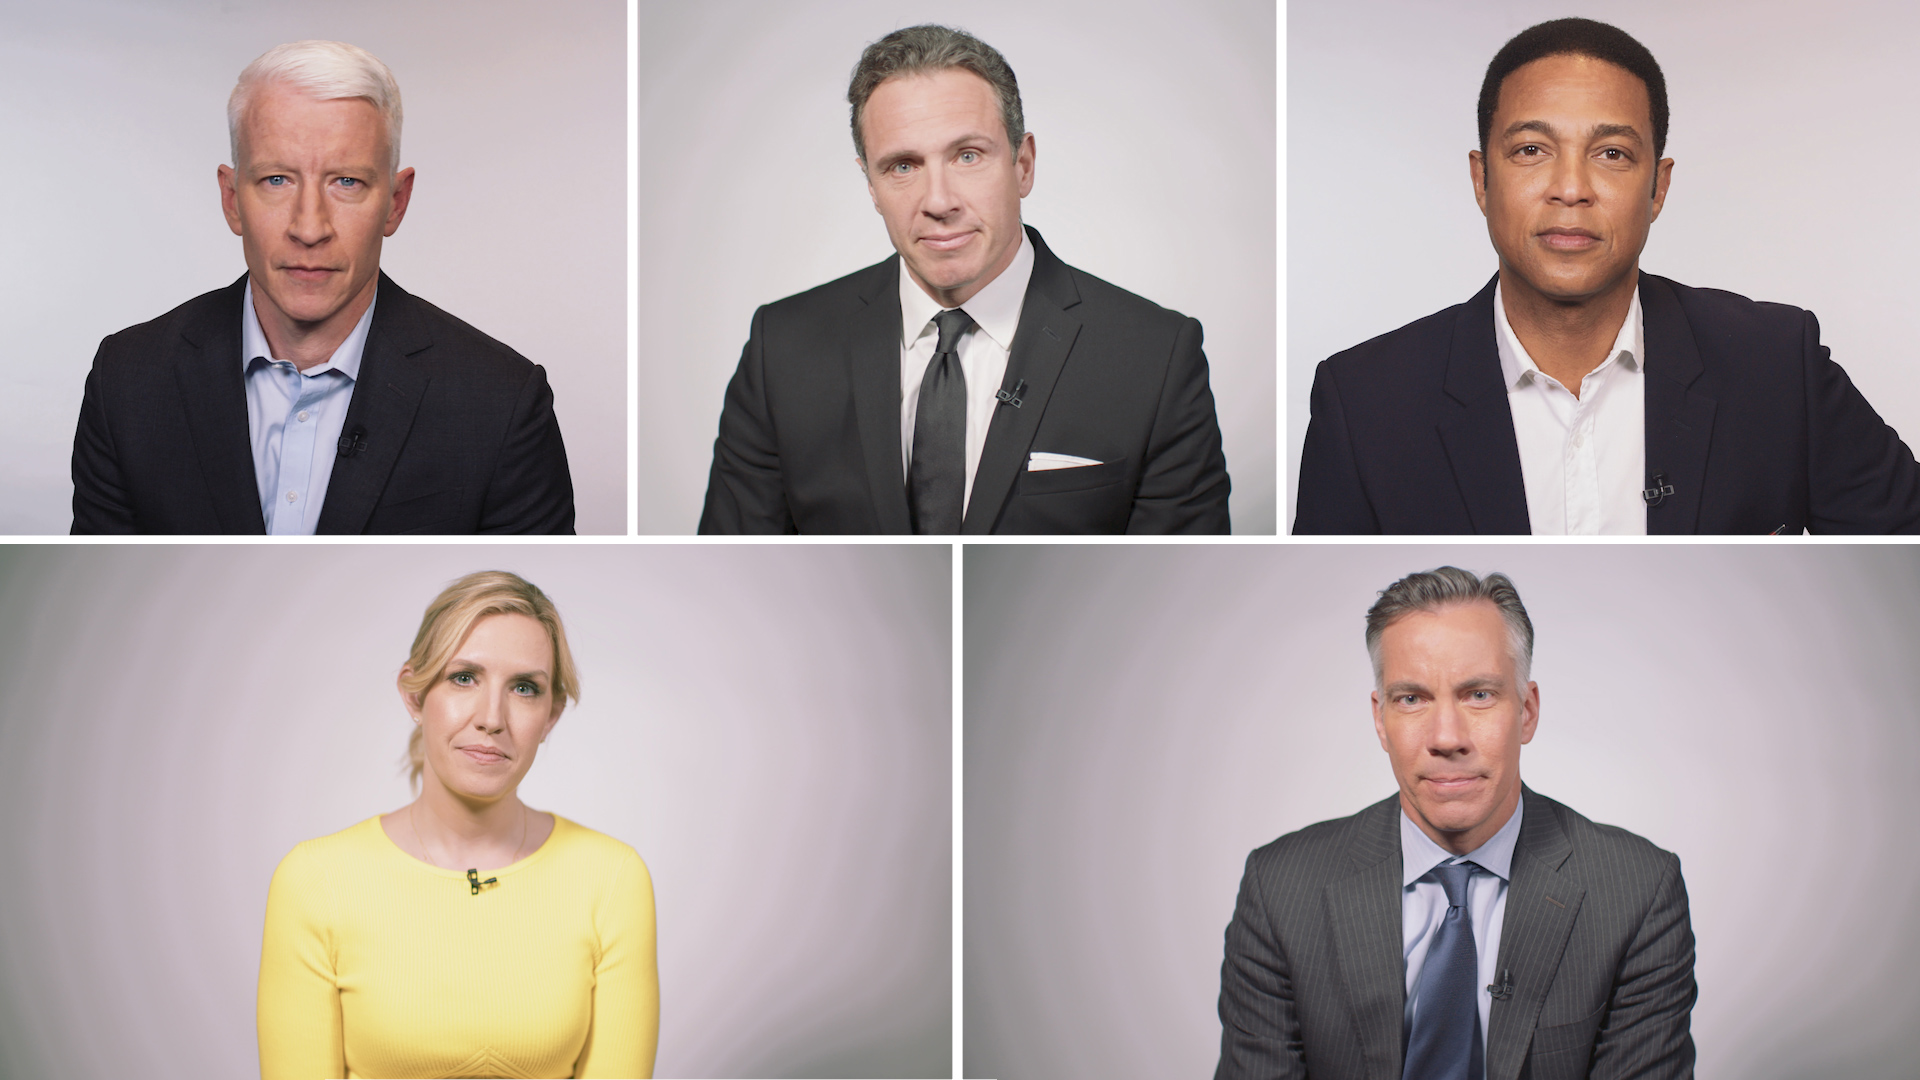 Cnn Anchors On Uncommon Approaches To Their Lives And Careers Cnn Video